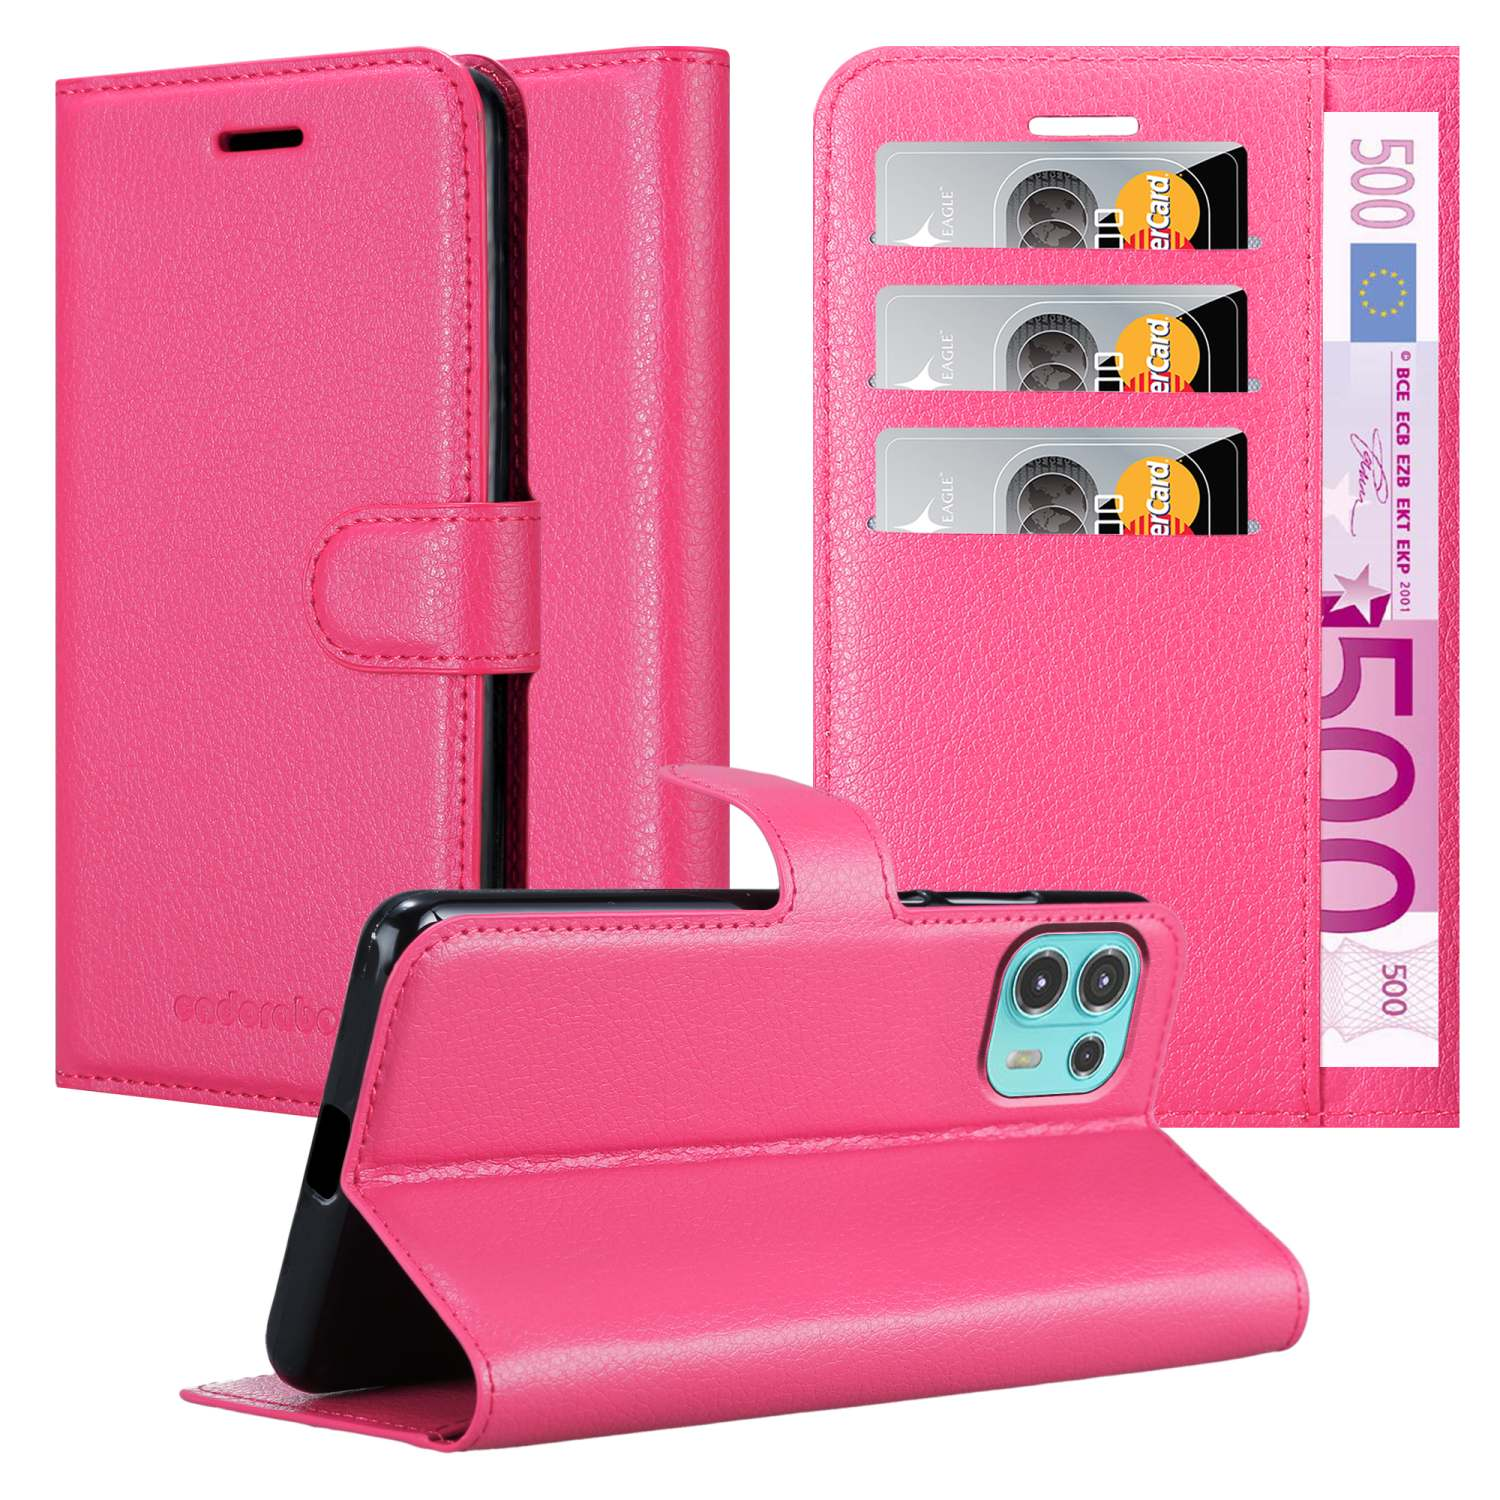 CADORABO Book CHERRY Motorola, LITE EDGE / Hülle Bookcover, PINK FUSION, 20 Standfunktion